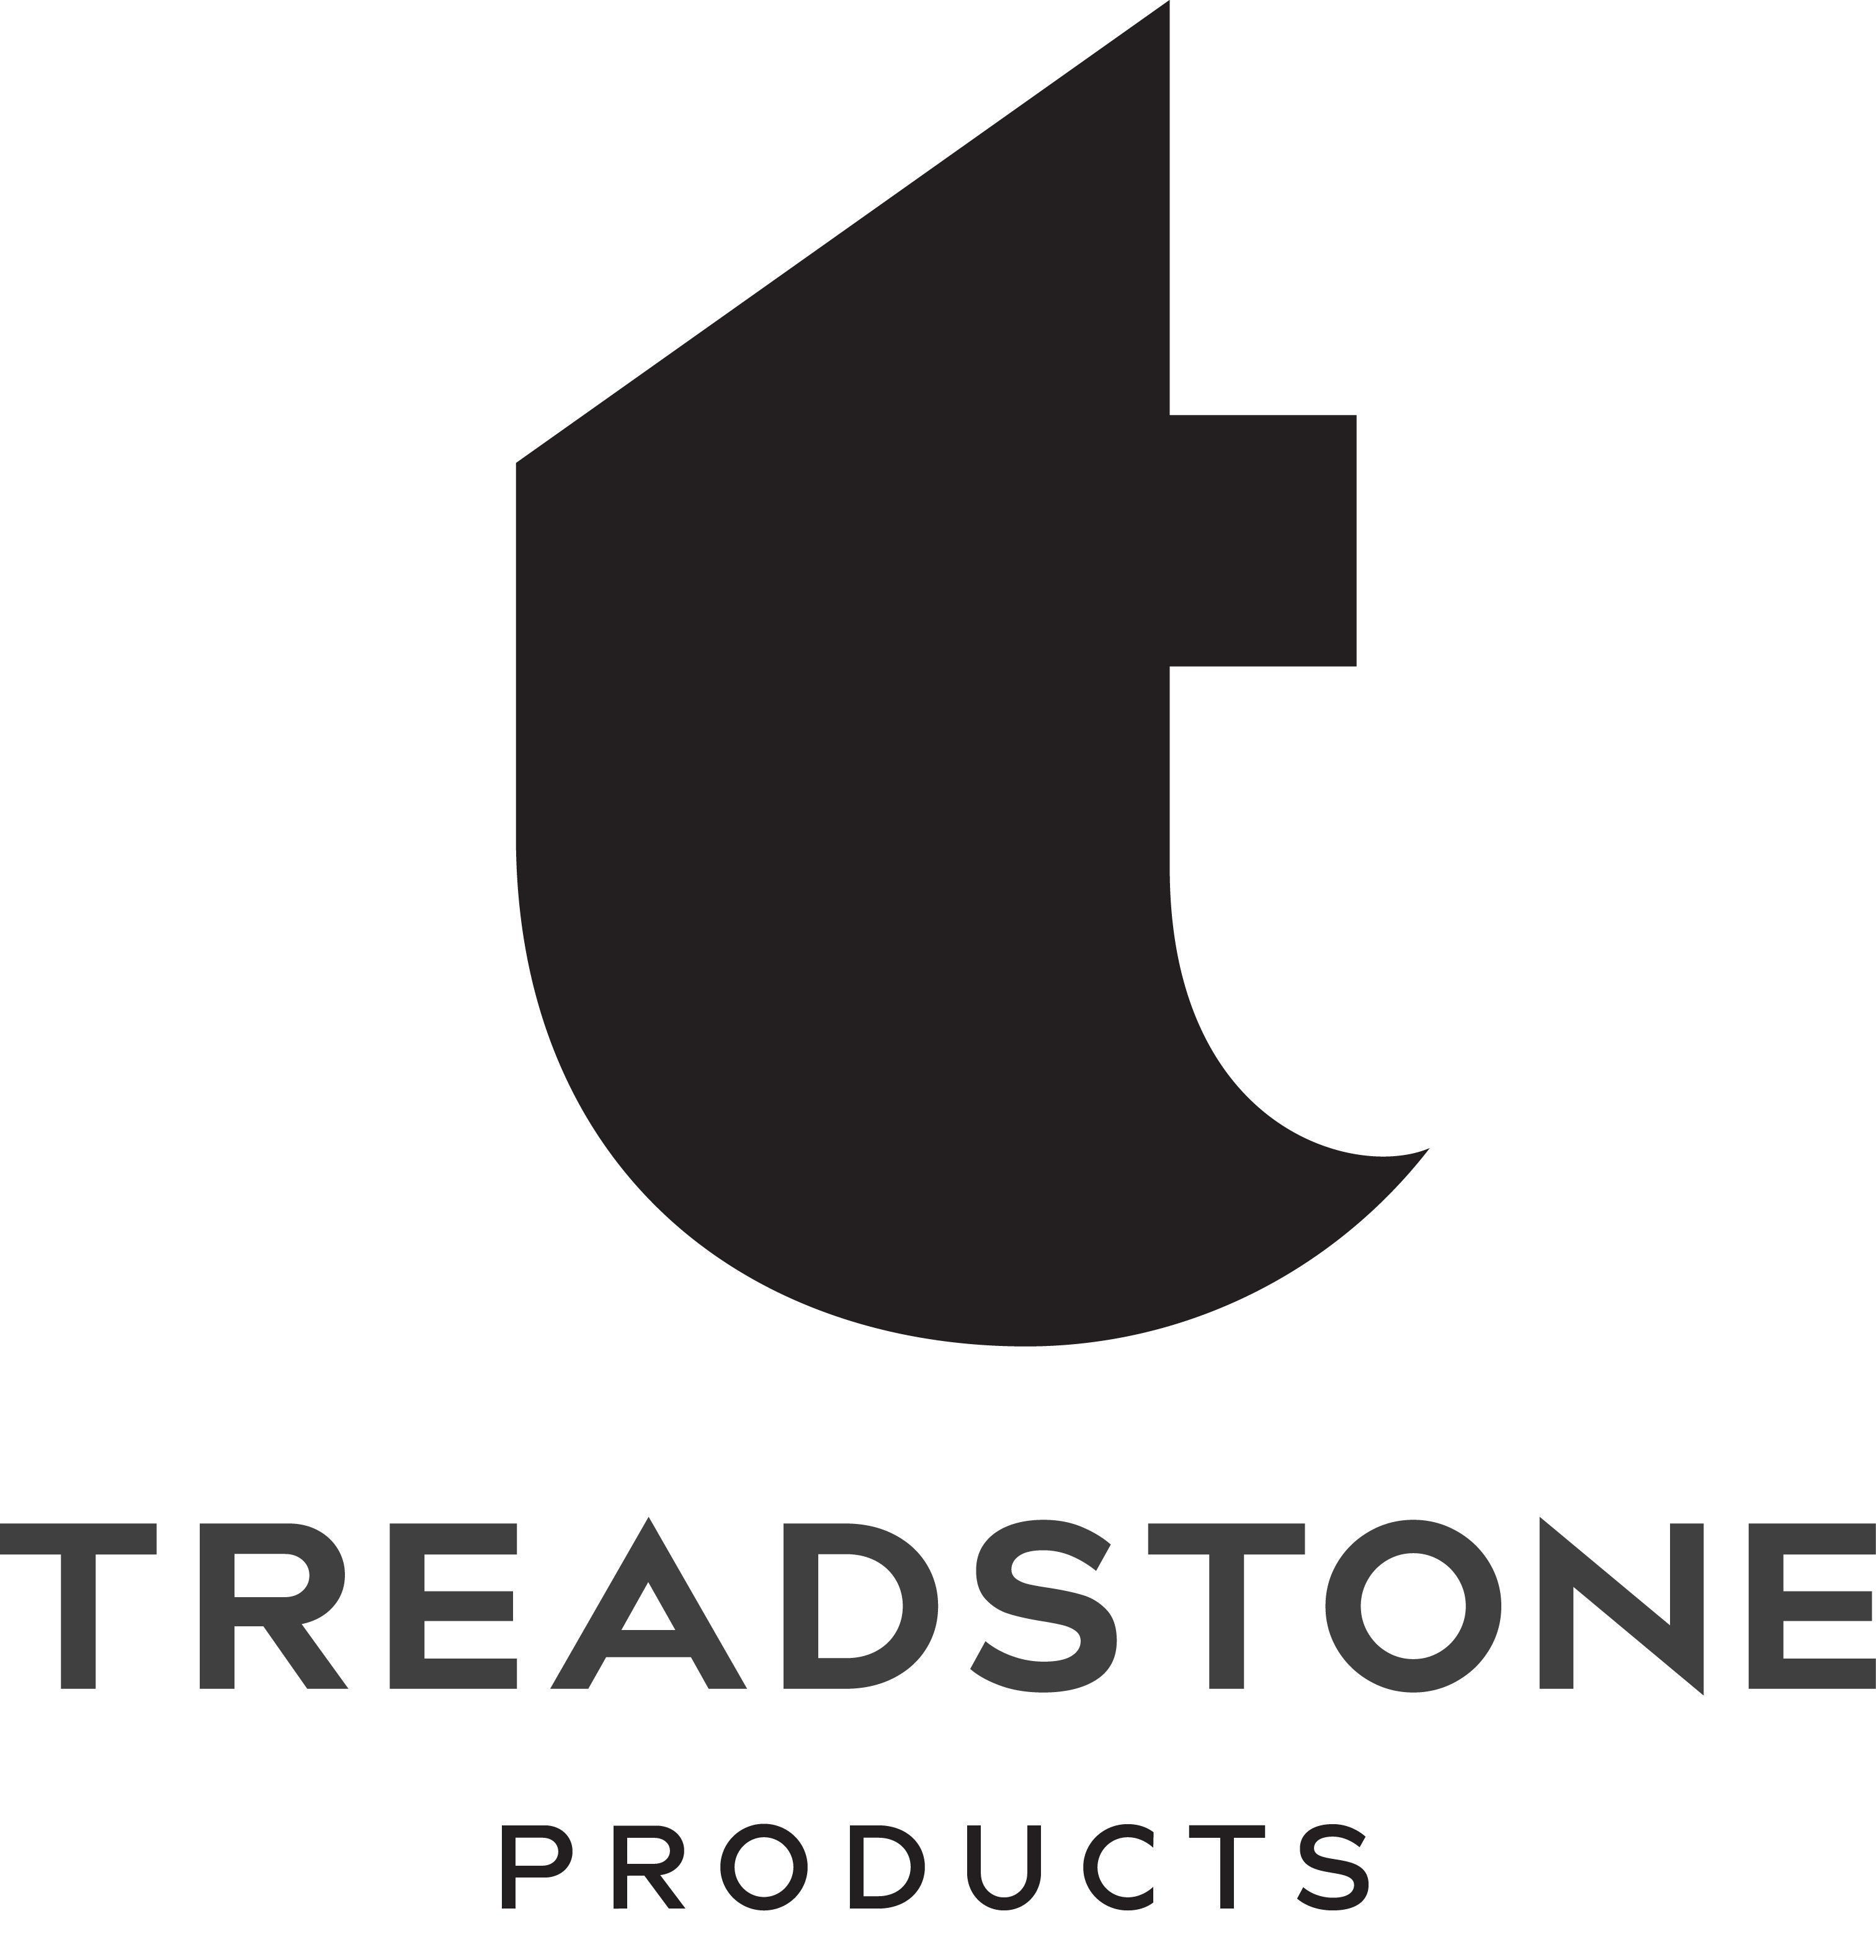 Treadstone Products